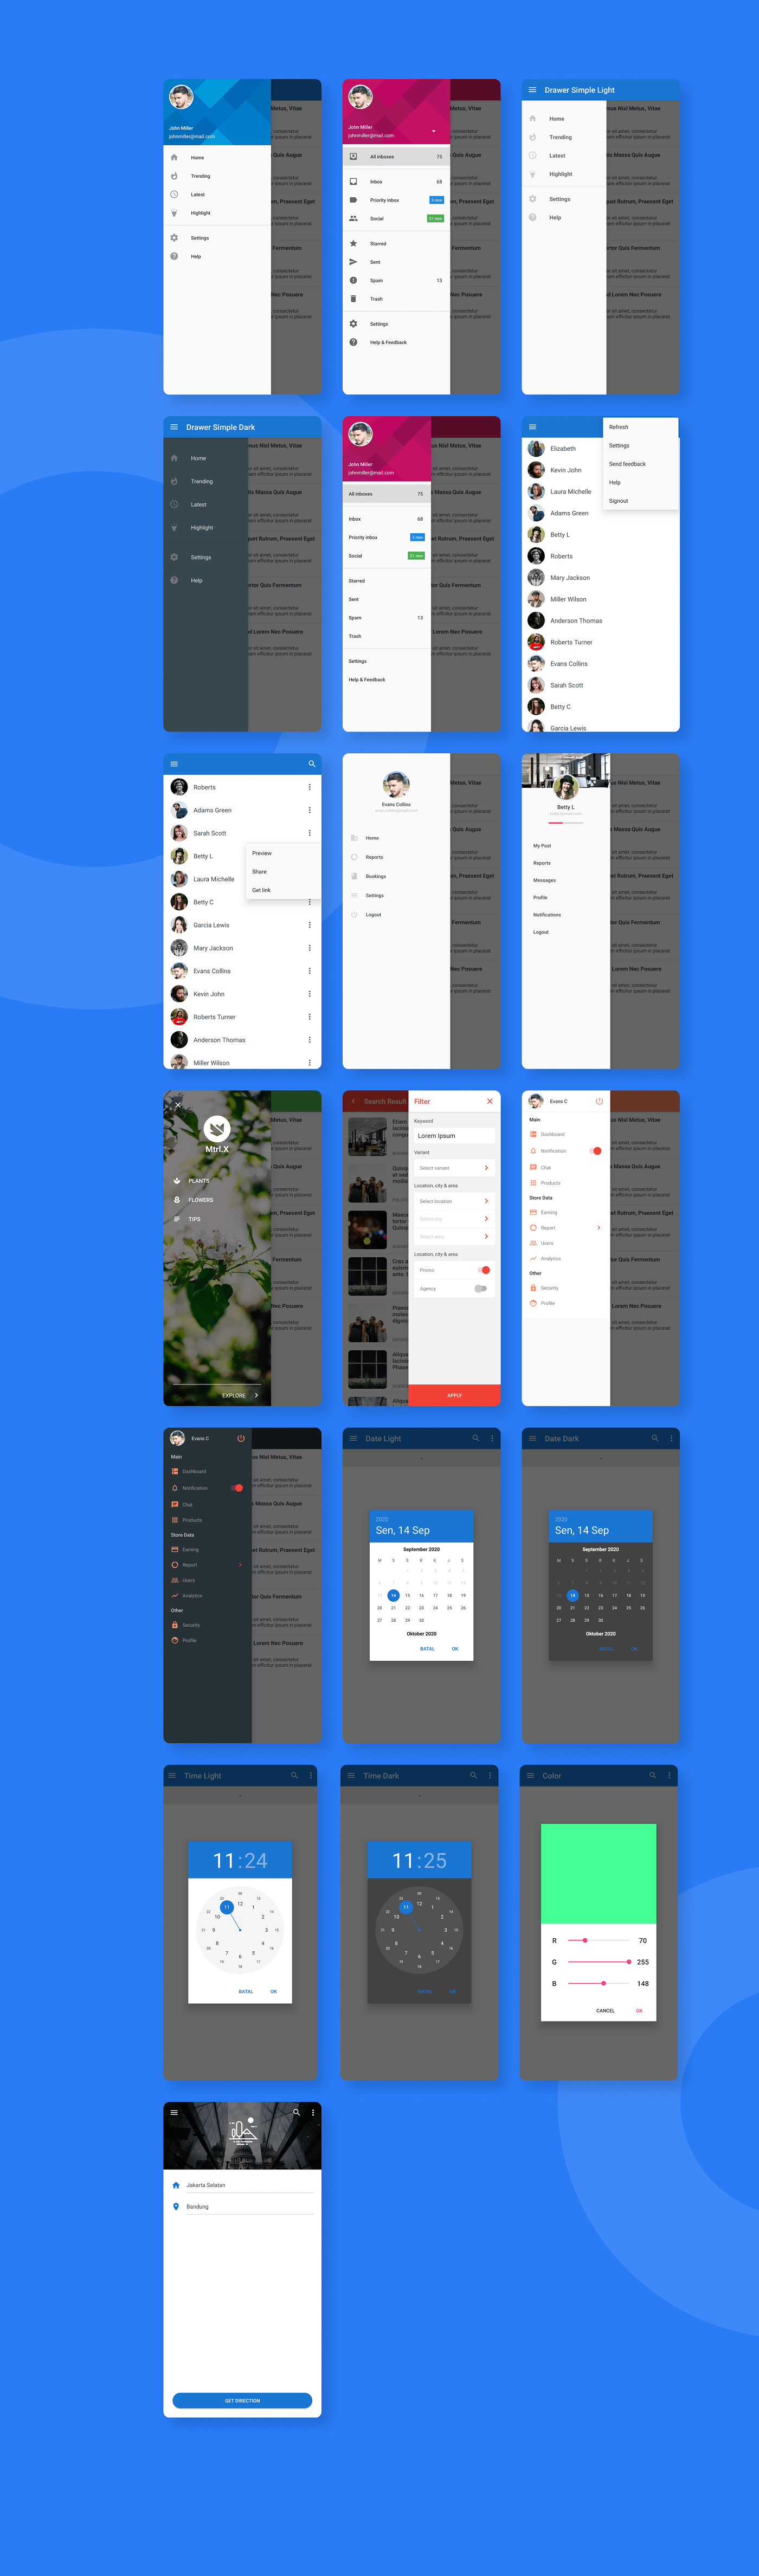 MaterialX - Android Material Design UI Components 2.7 - 18